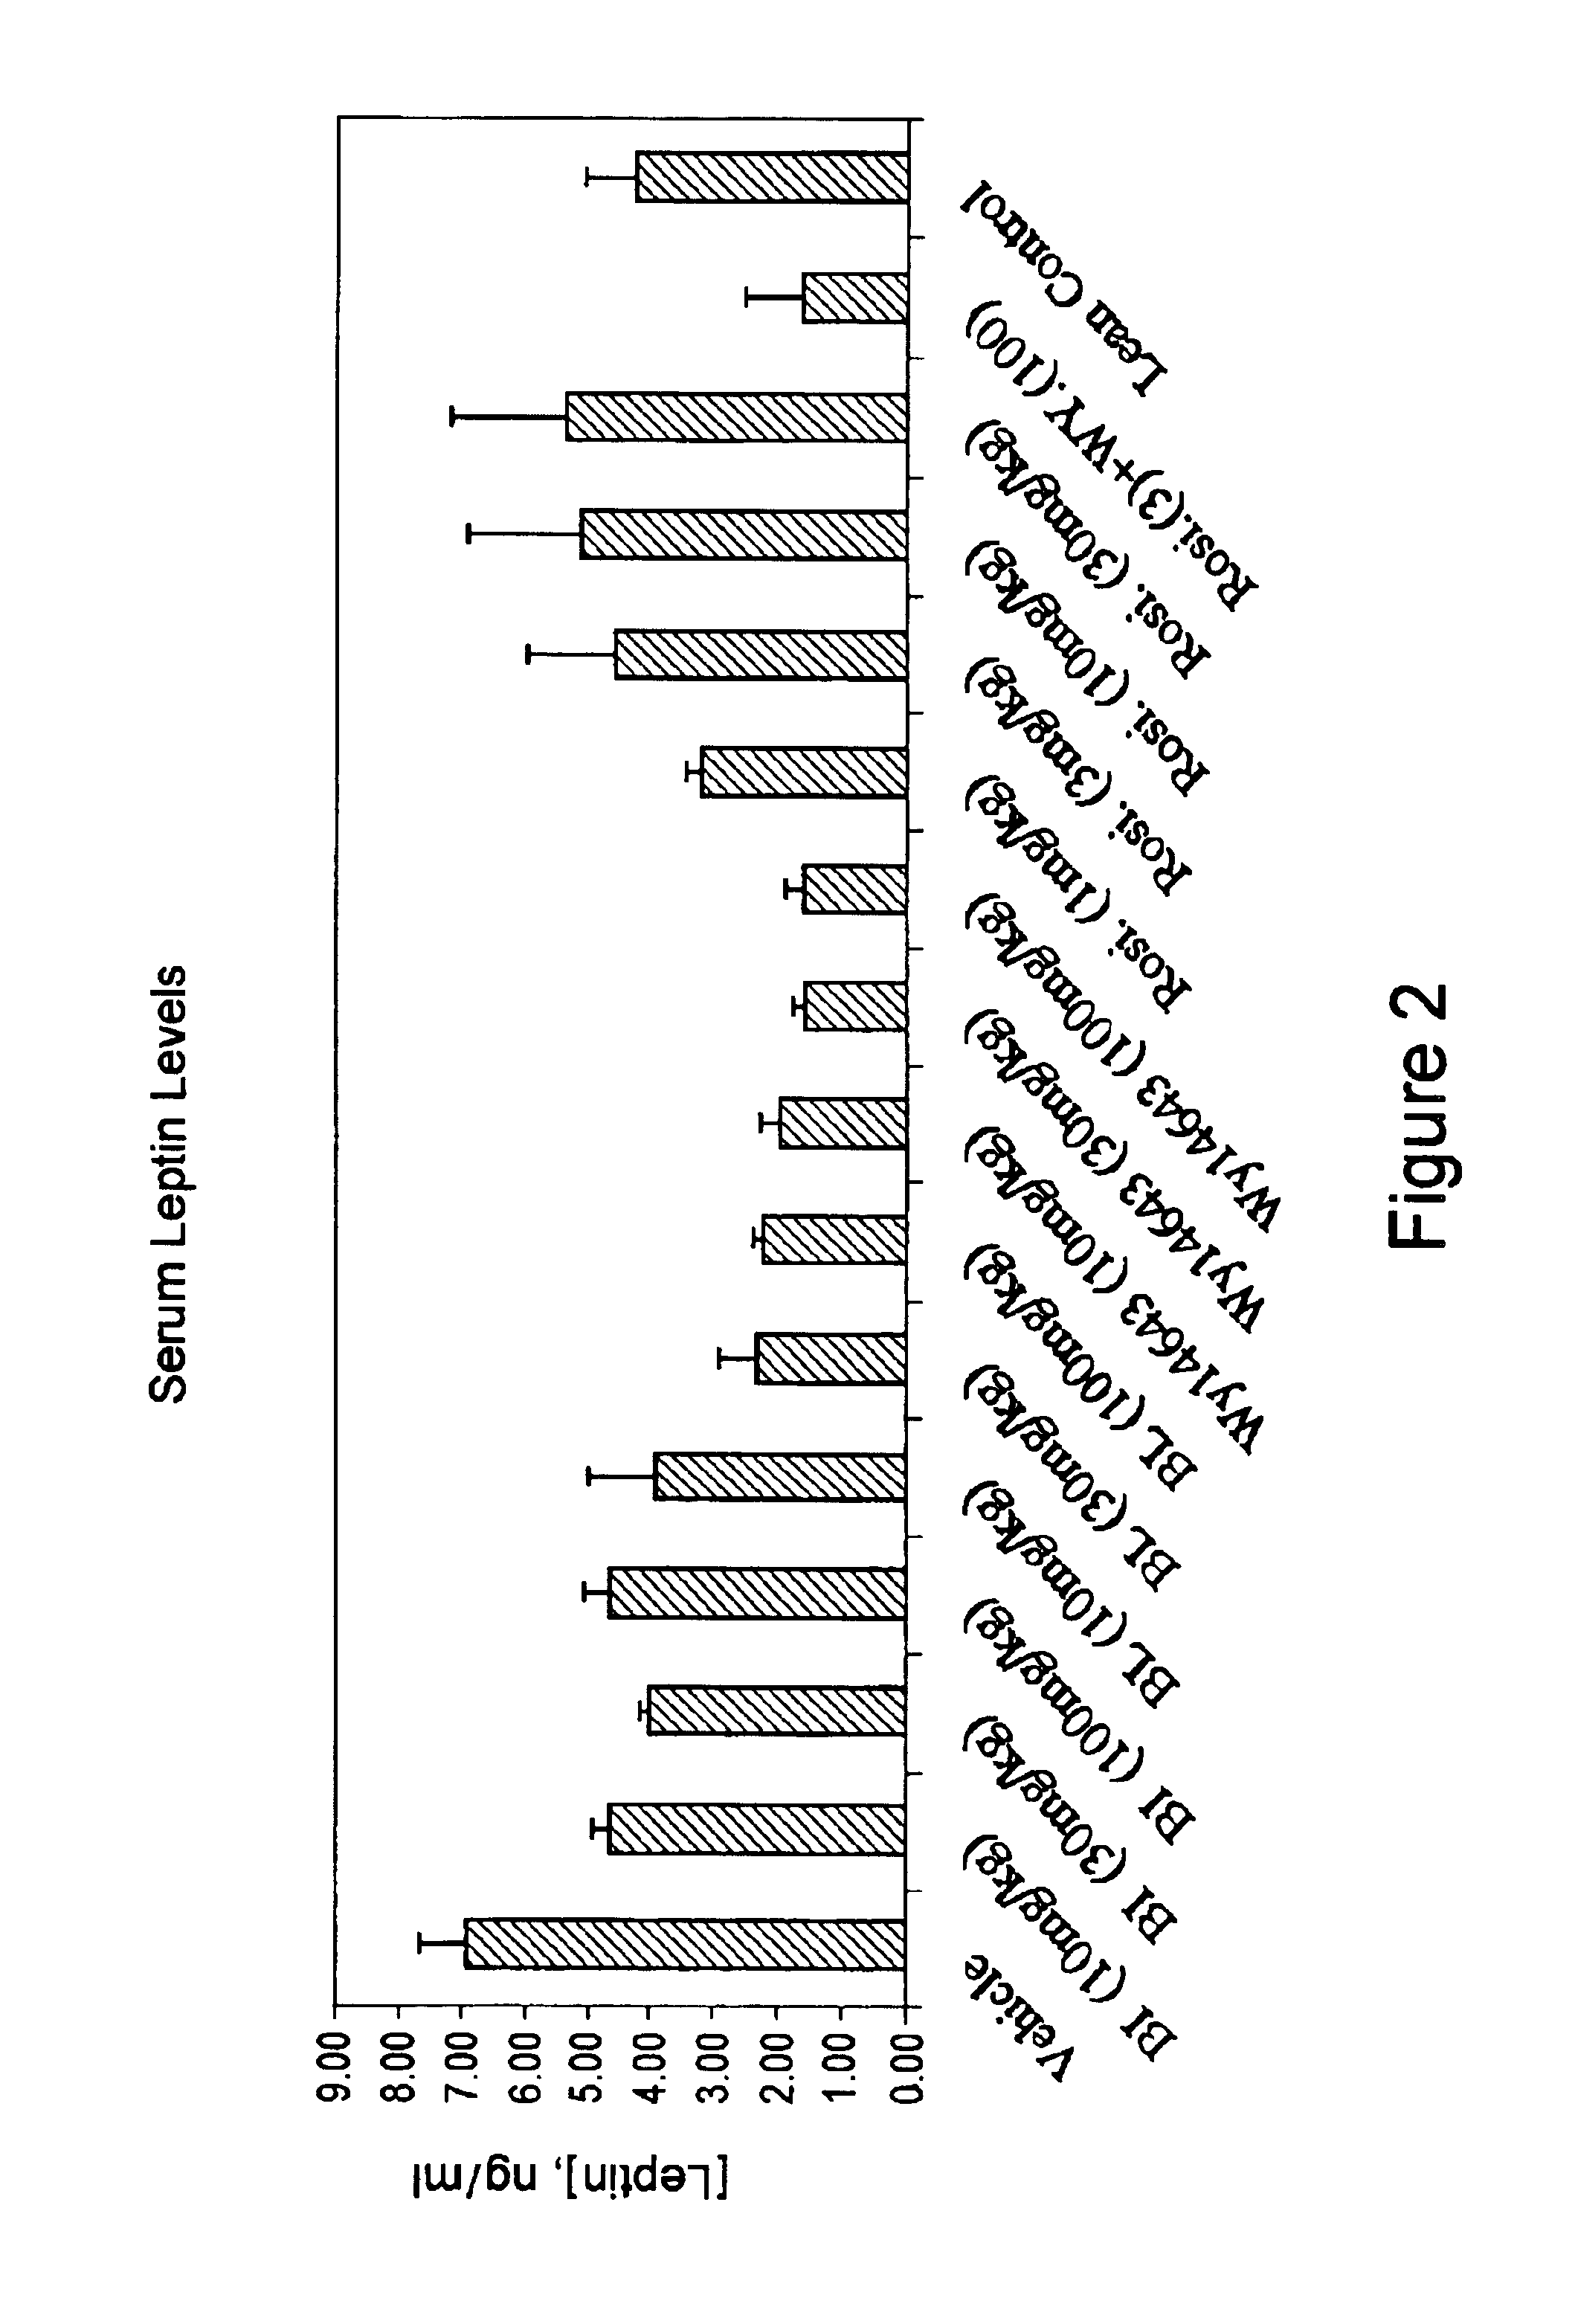 Compounds for the treatment of metabolic disorders